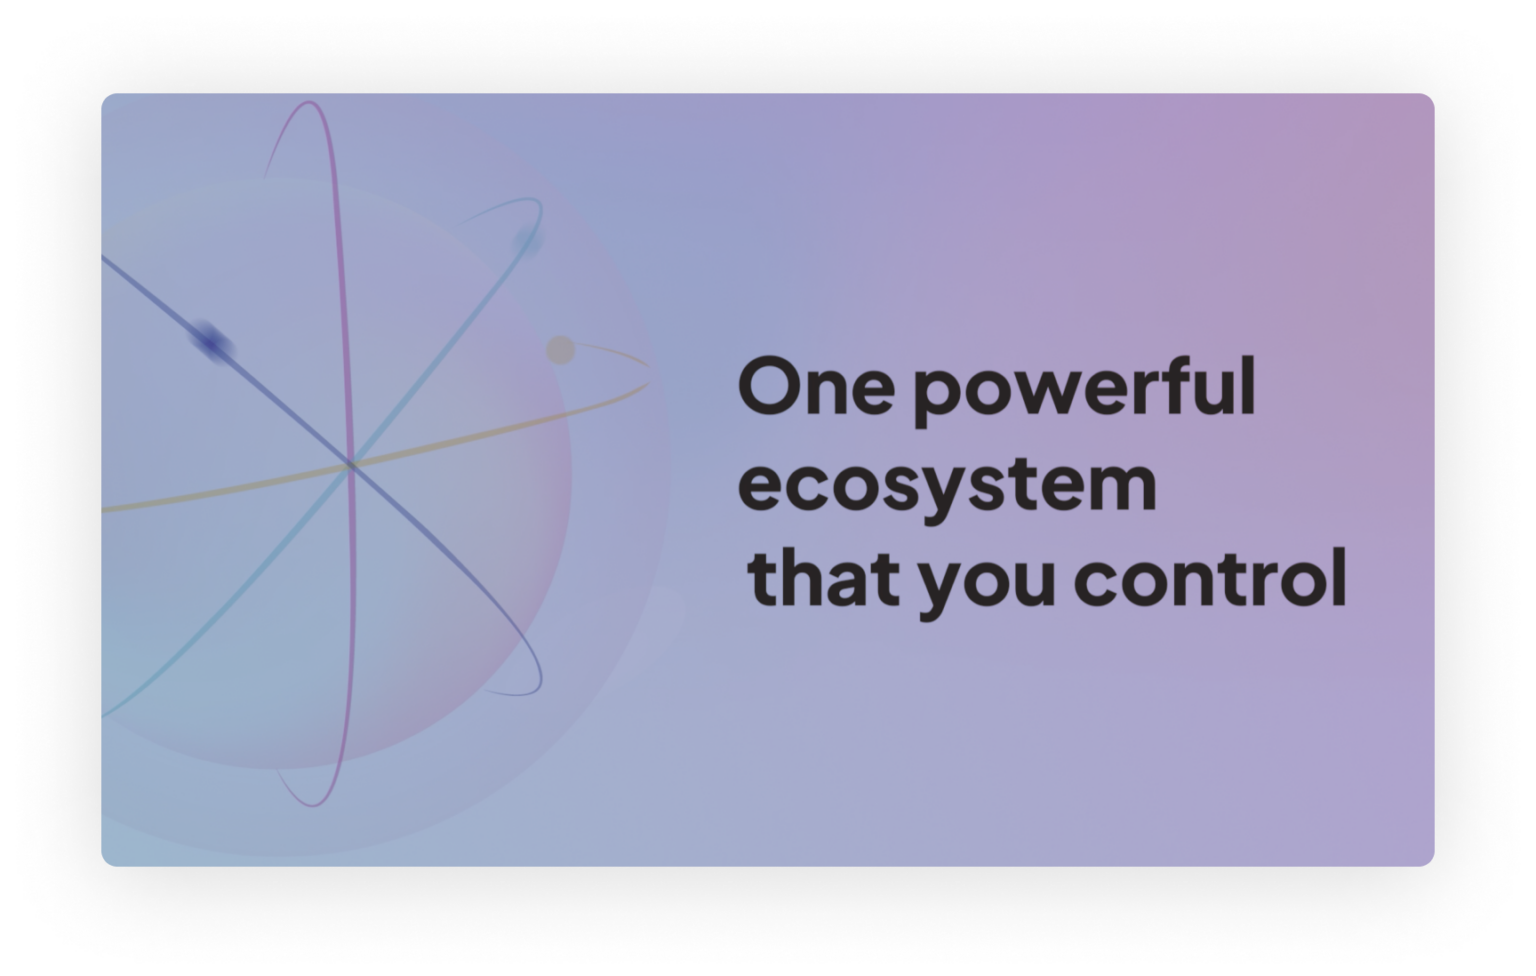 One powerful ecosystem that you control